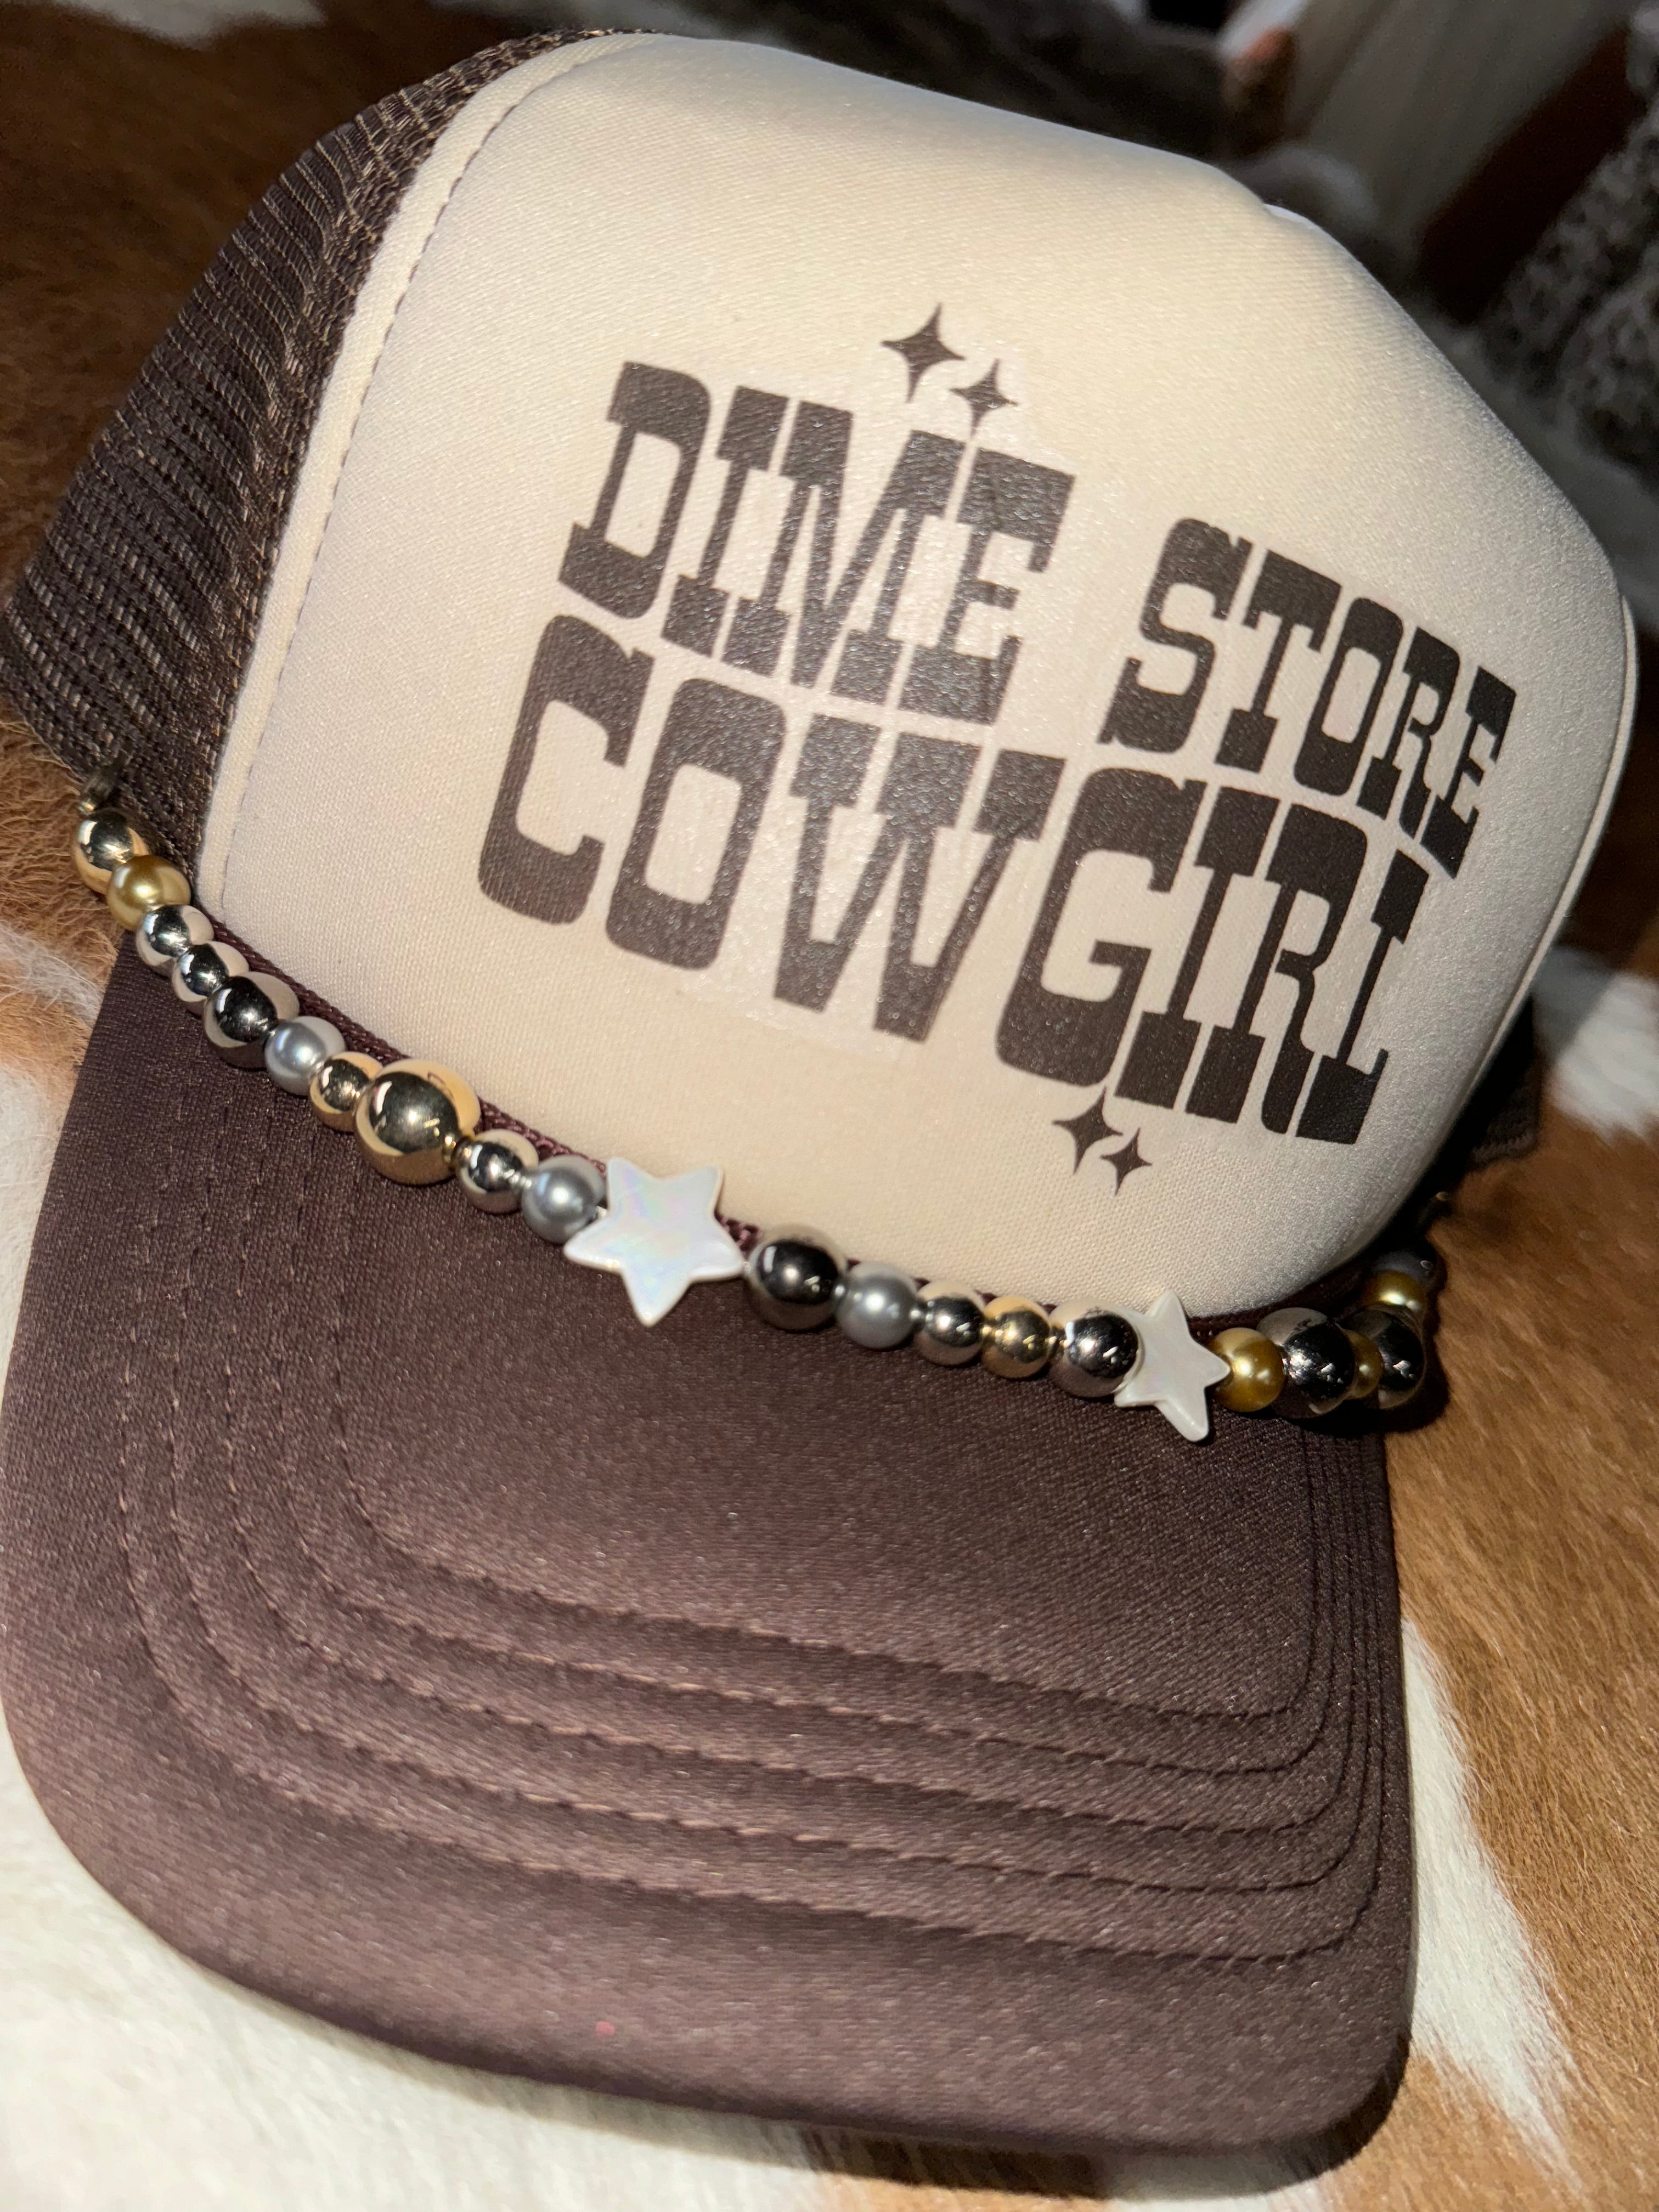 Dime Store Cowgirl Trucker Hat